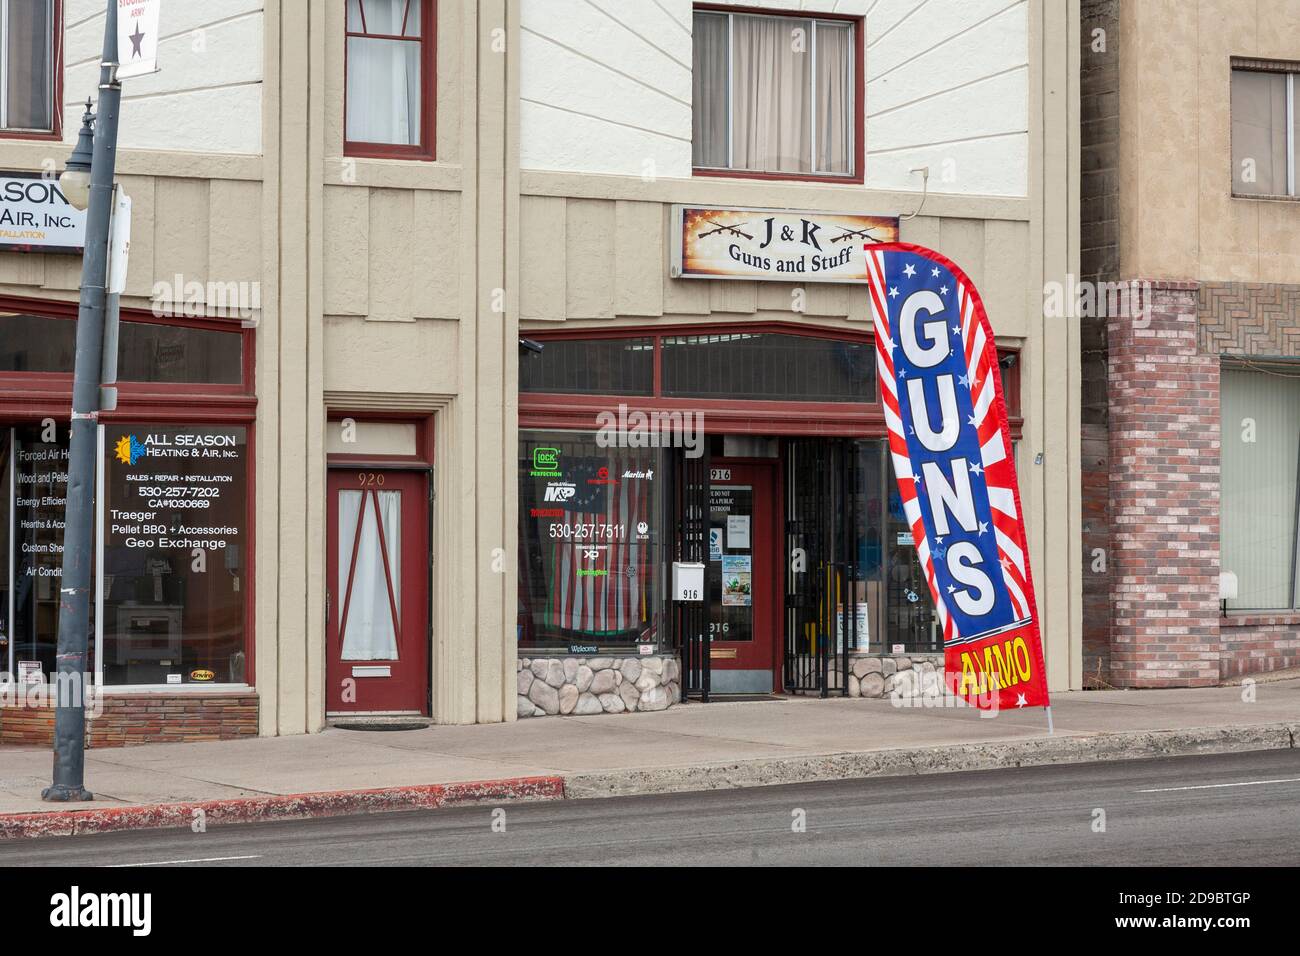 SUSANVILLE, CA - MARCH 31, 2020 - Having been deemed an essential service by President Trump and local authorities, a gun store remains open. Stock Photo